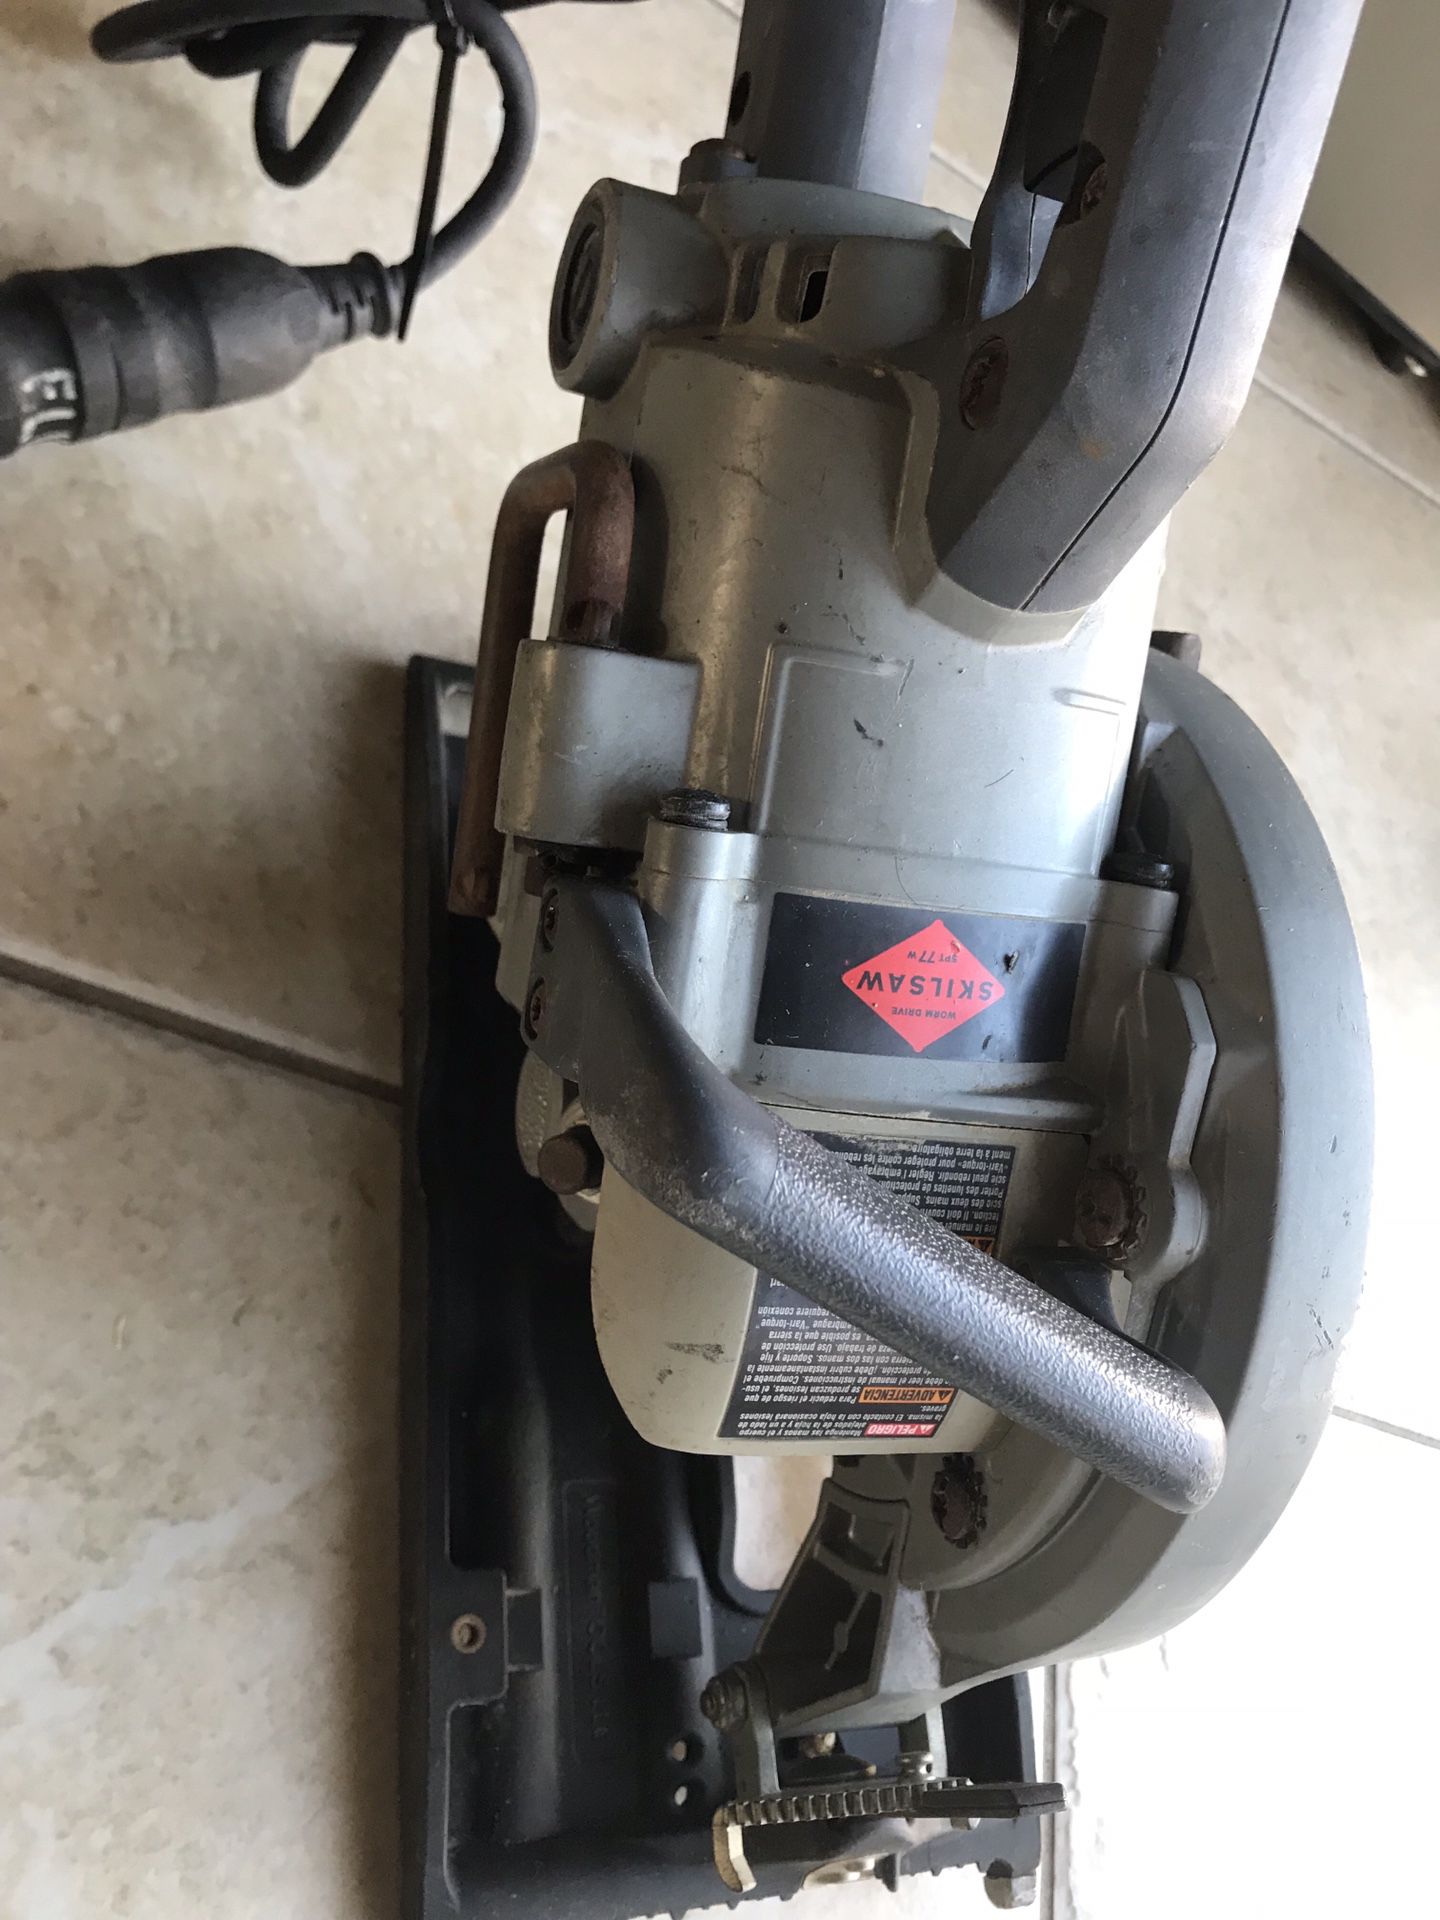 SKIL HD77 13 Amp 7-1/4-Inch Worm Drive Saw for Sale in San Diego, CA  OfferUp